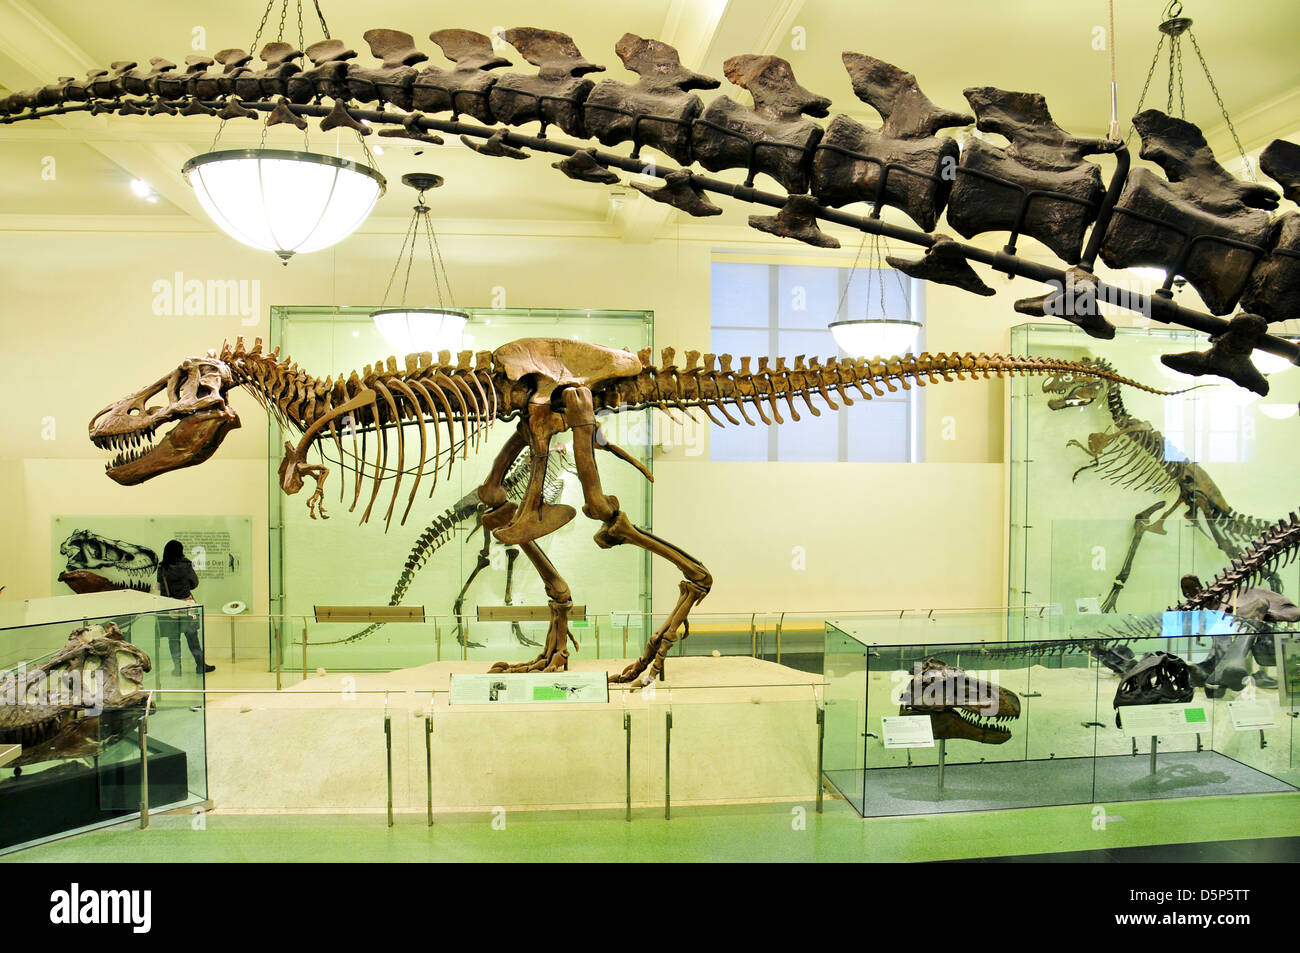 T Rex, Dinosaurs, American Museum of Natural History, Upper West Side, Manhattan, New York City, USA Stock Photo